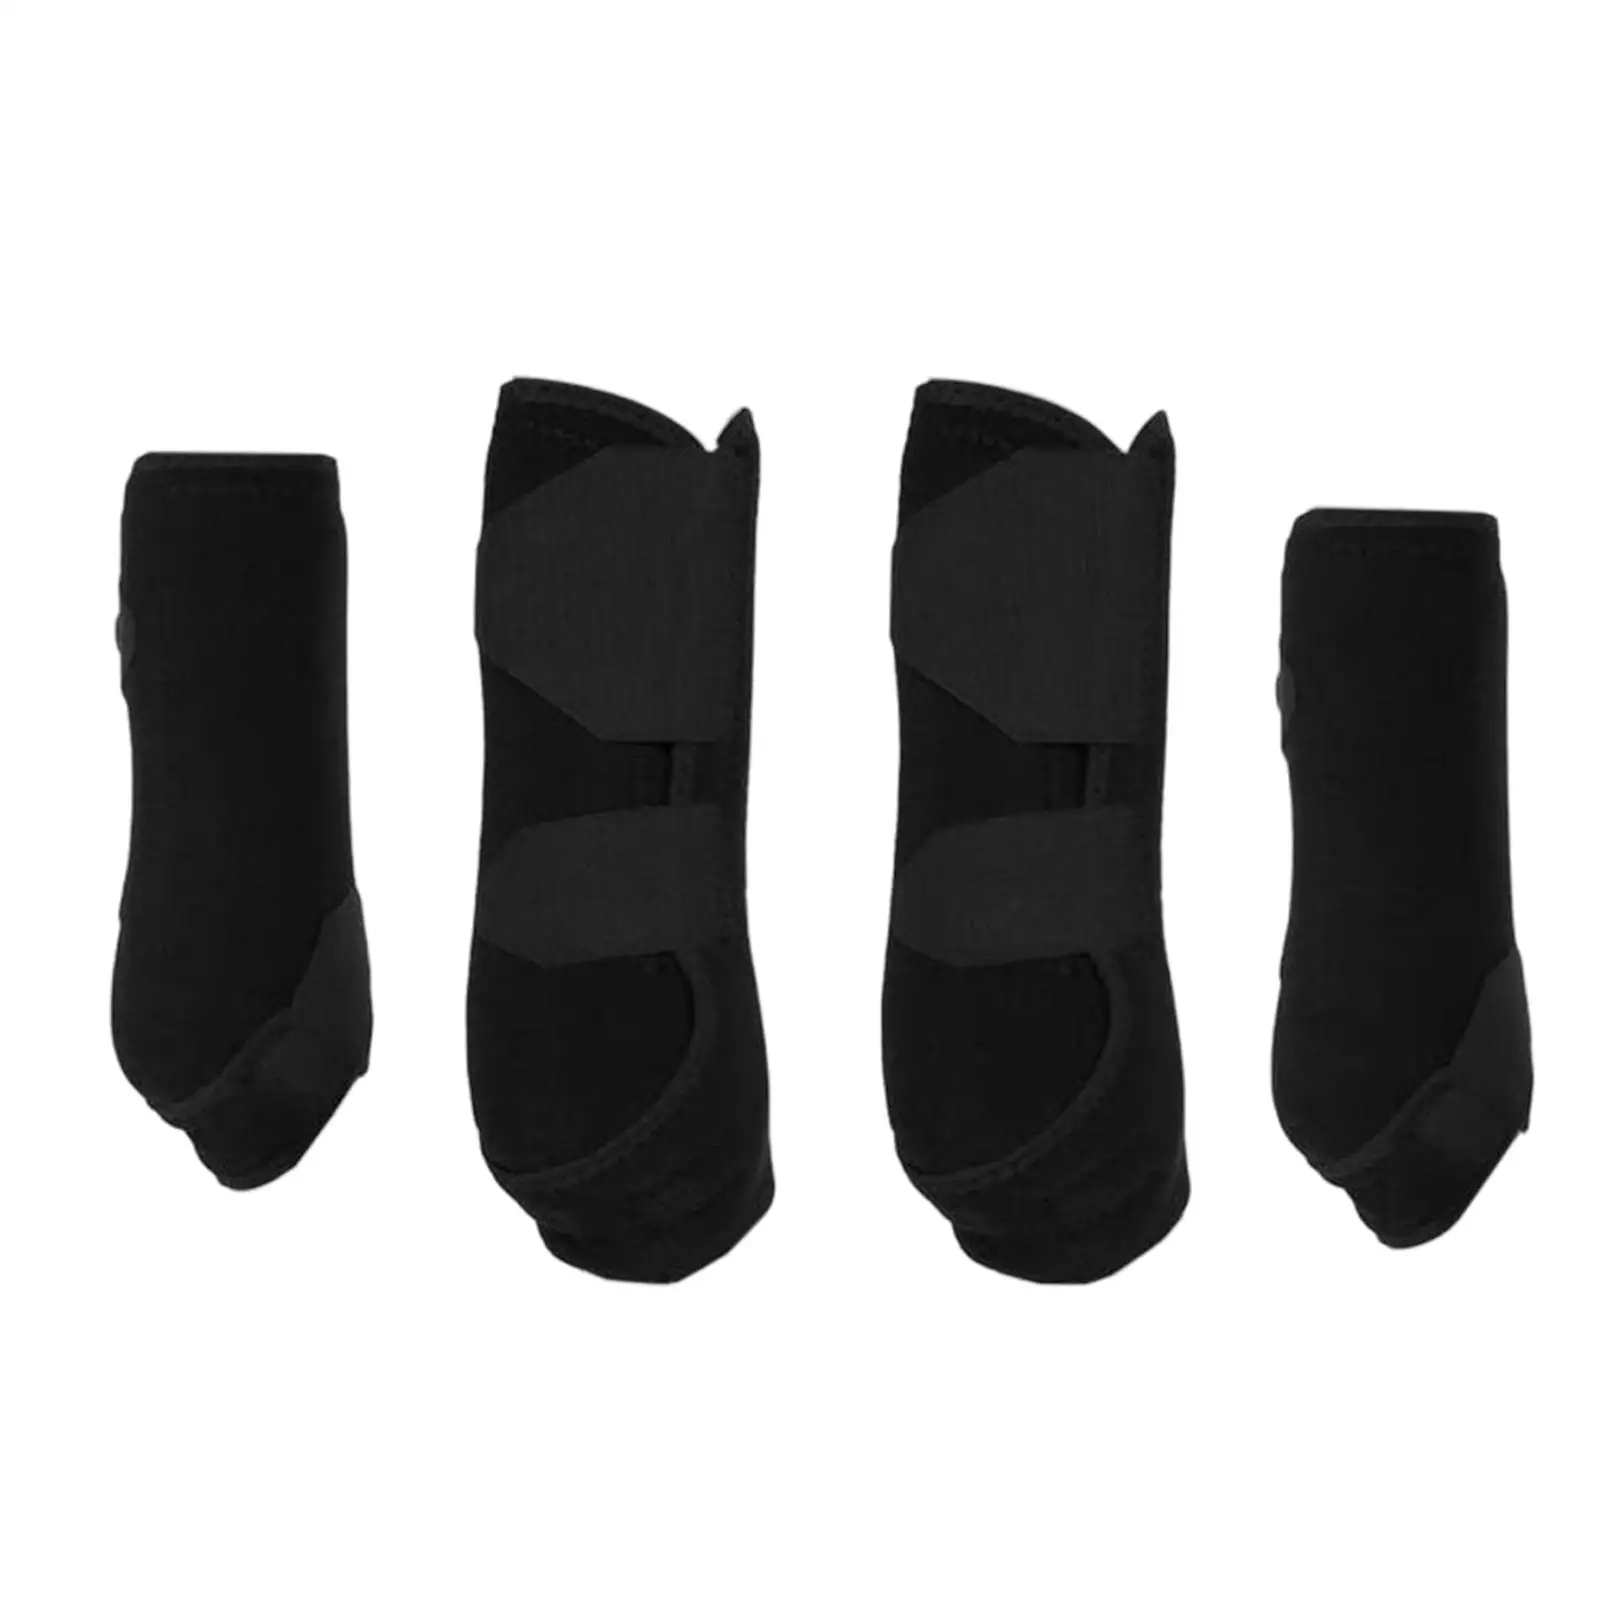 4Pcs Neoprene Horse Boots Leg Wraps Shock Absorbing Protector Guard for Jumping Riding Training Equestrian Equipment